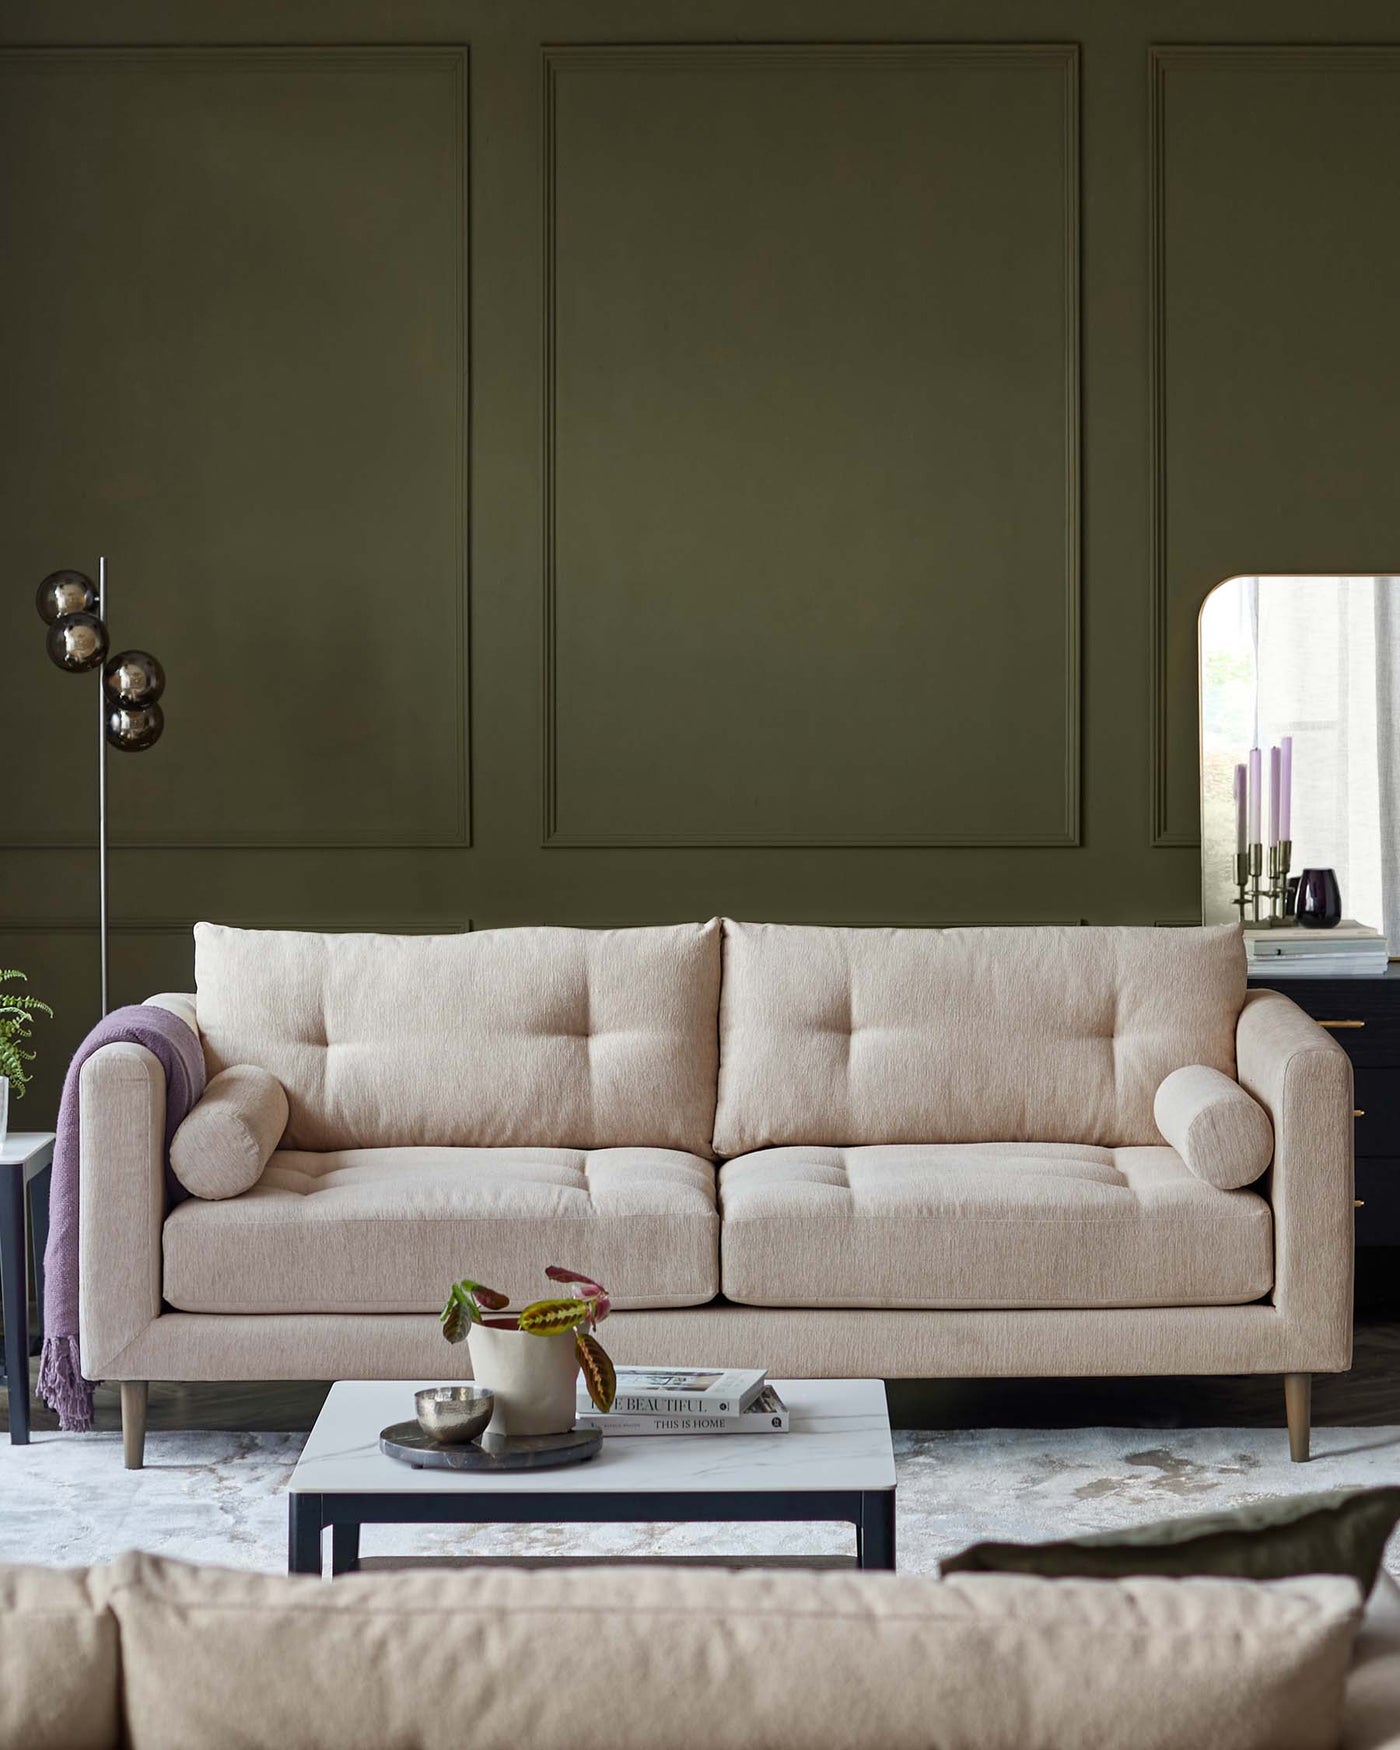 A modern three-seater sofa with a neutral beige fabric upholstery and minimalist design. The sofa features plush back cushions, a single bench seat cushion, and one rounded armrest bolster pillow. It stands on subtle wooden legs and is accompanied by a low-profile, rectangular, grey coffee table with a light-coloured tabletop accentuated with small decorative items and a book.